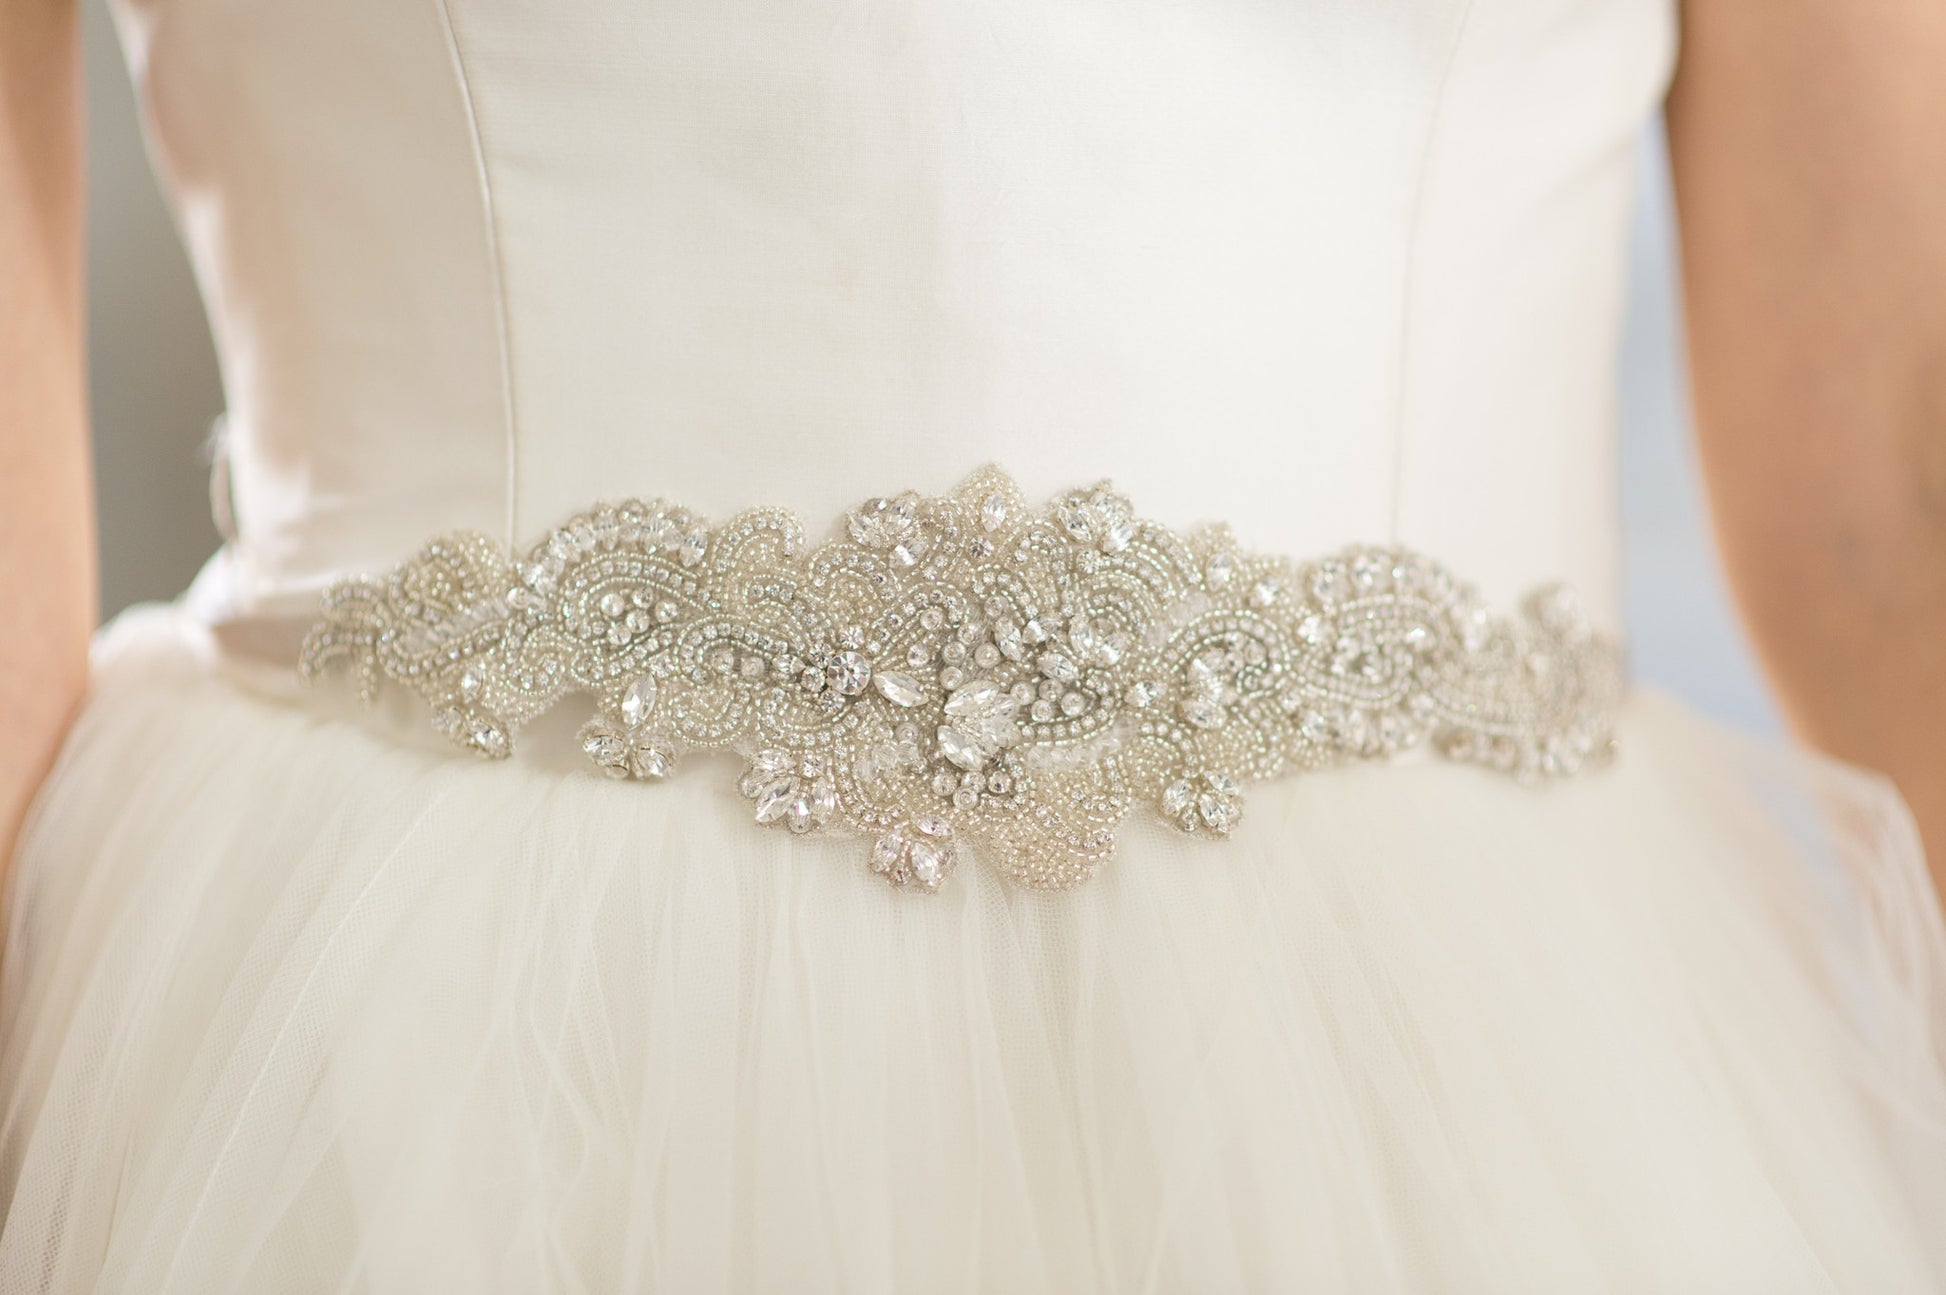 Crystal Jeweled Bridal Sash Beaded Silver Belt for Wedding Dress Vintage Embellished Applique Art Deco Trim for Bridal Gown Rhinestone, ELSA  BELT, for Her, for Bride, for Bridesmaid Gift , for Mother of the Bride, for Wedding Guest or Special Occasion by Camilla Christine Bridal Jewelry and Wedding Accessories. Bridal Style Inspiration Trends for Bride, Wedding Ideas